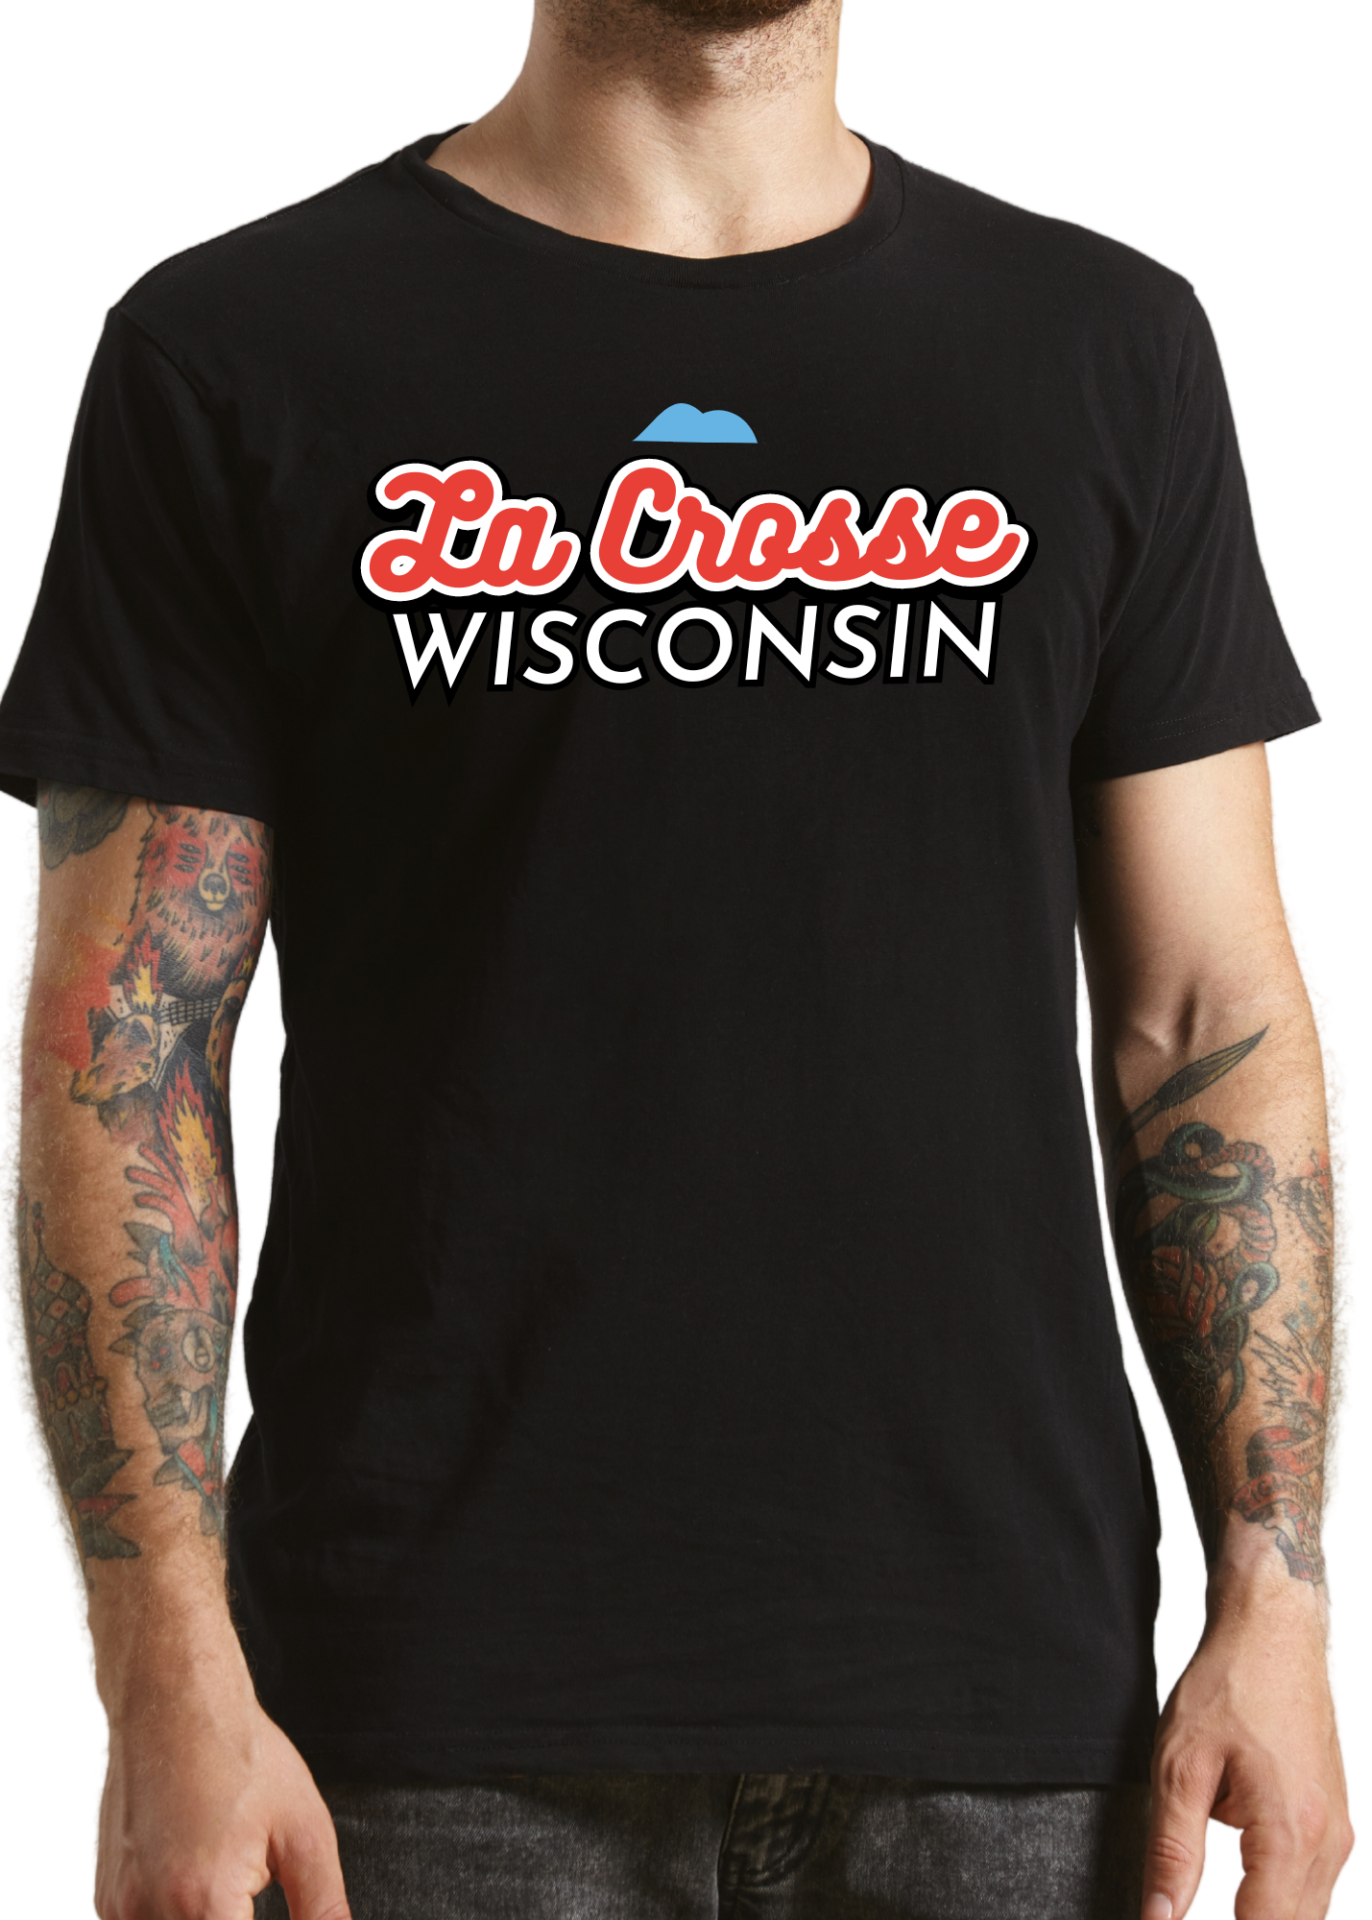 La Crosse Wisconsin text on a black shirt with blue mountains